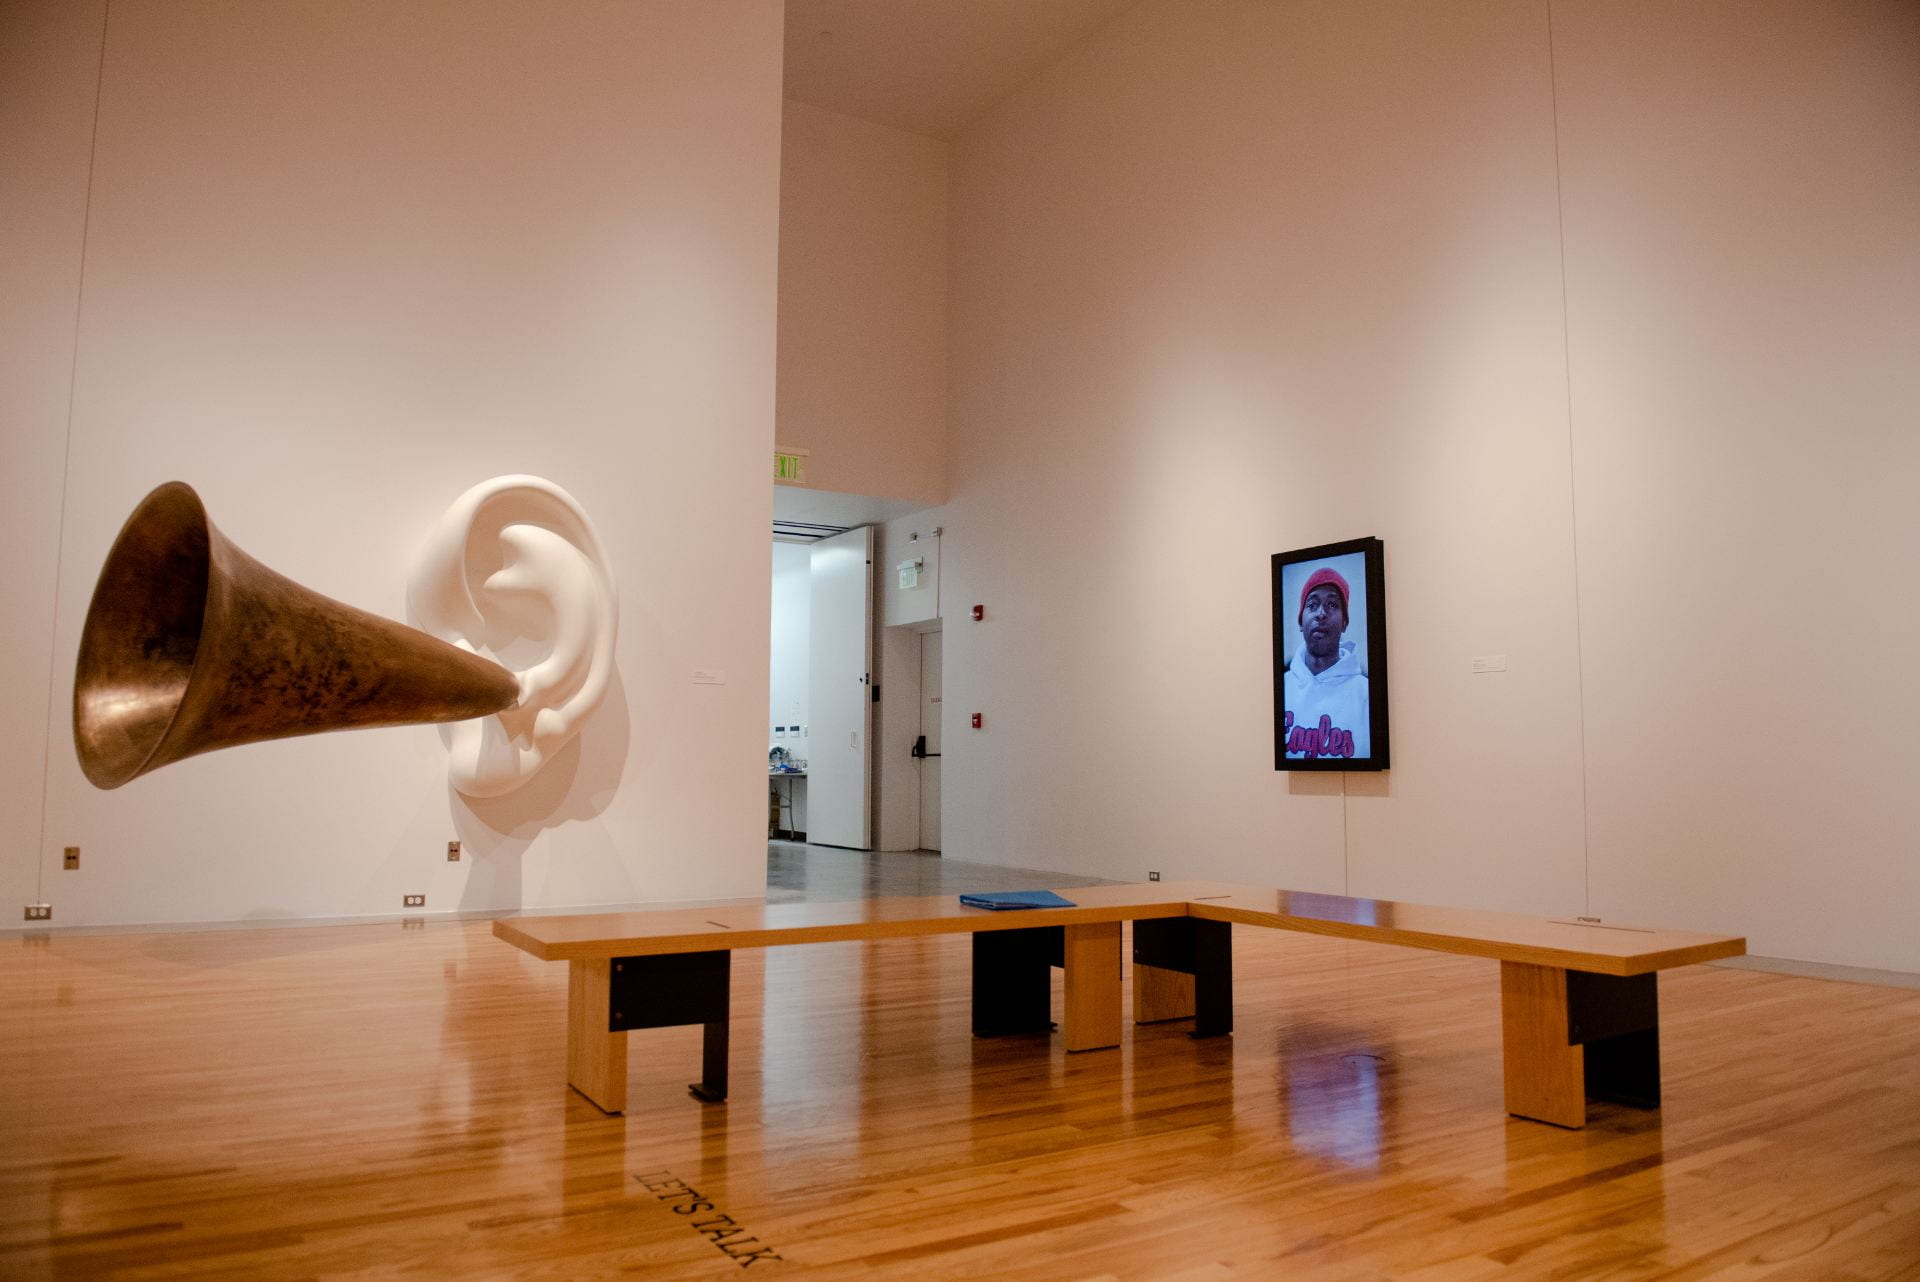 Gallery photo of the exhibition "Do You See What I See?" at the Beach Museum of Art